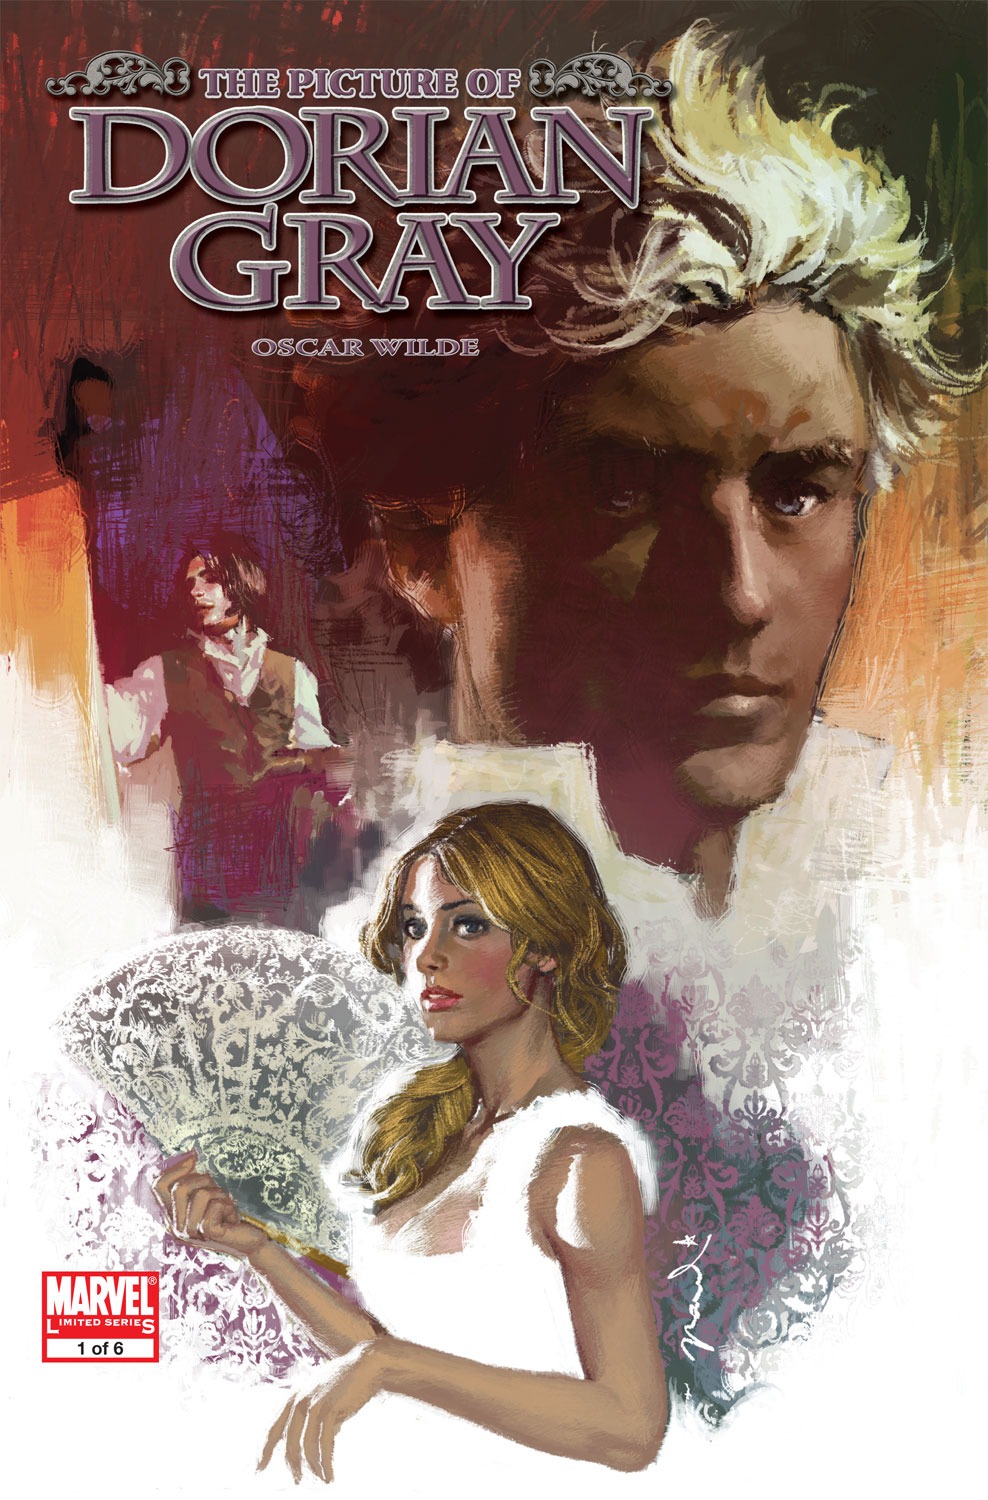 Read online Marvel Illustrated: The Picture of Dorian Gray comic -  Issue #1 - 1